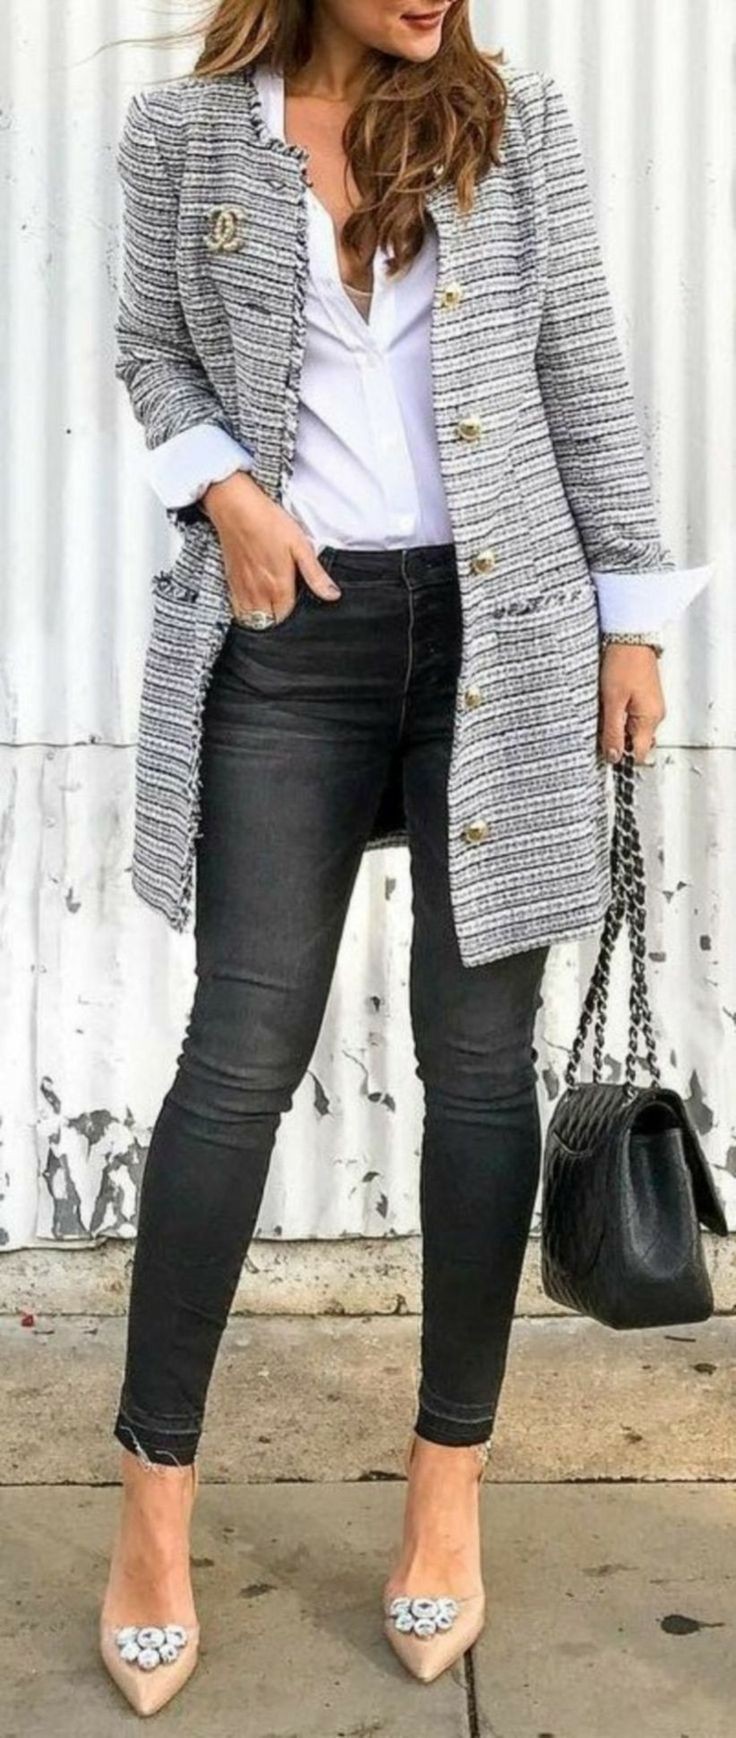 Winter smart casual outfit ideas | Women's Business Casual Fashion ...